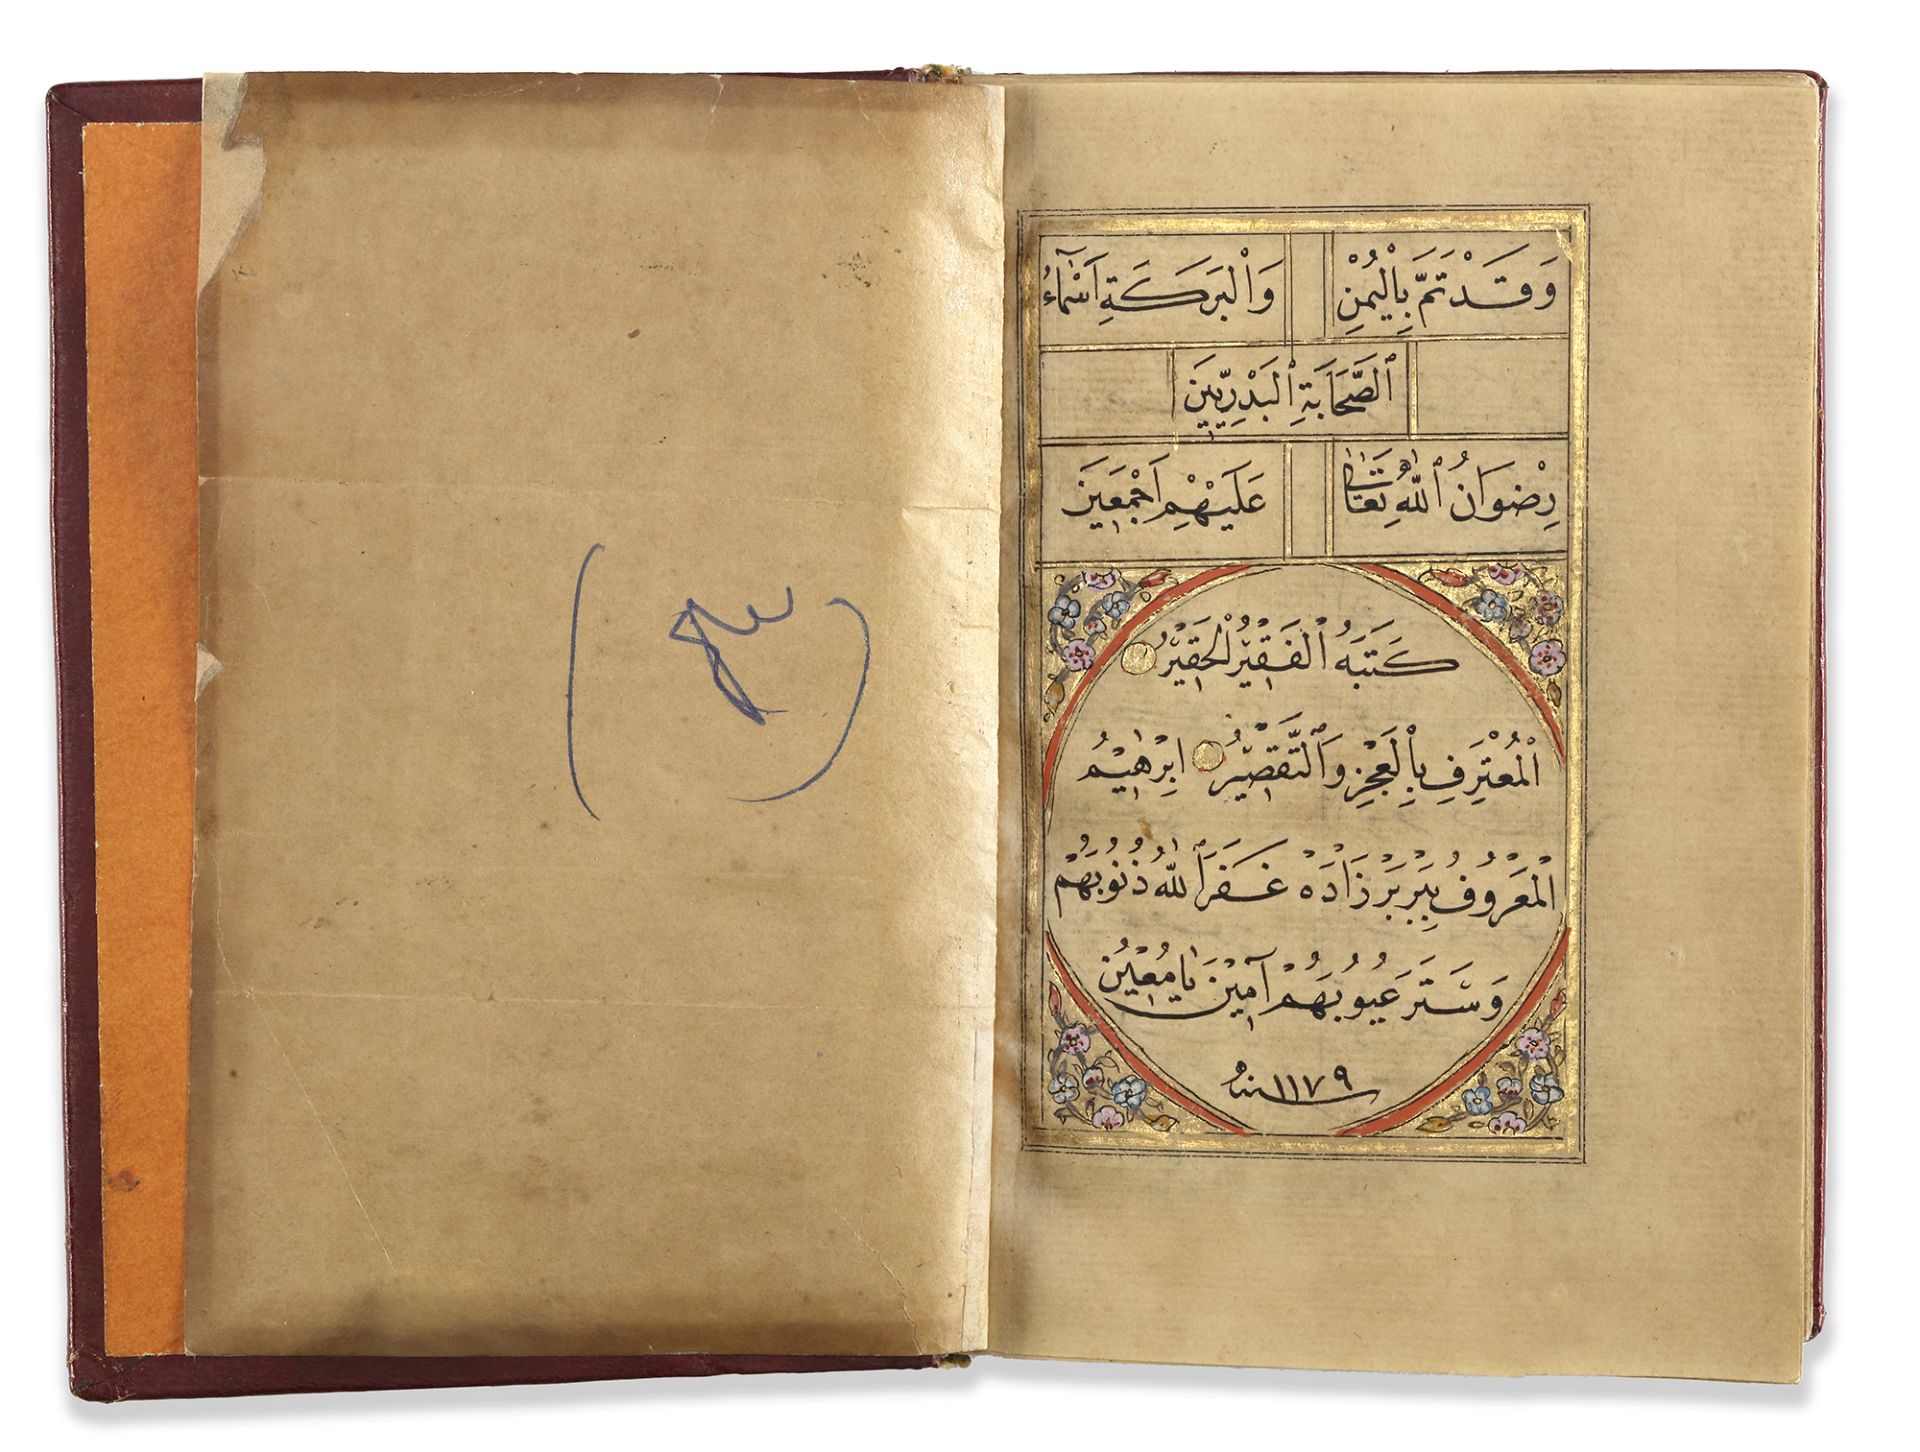 AN OTTOMAN PRAYER BOOK SIGNED BY IBRAHIM BERBERZADE, TURKEY, DATED 1179 AH/1765 AD - Image 4 of 6